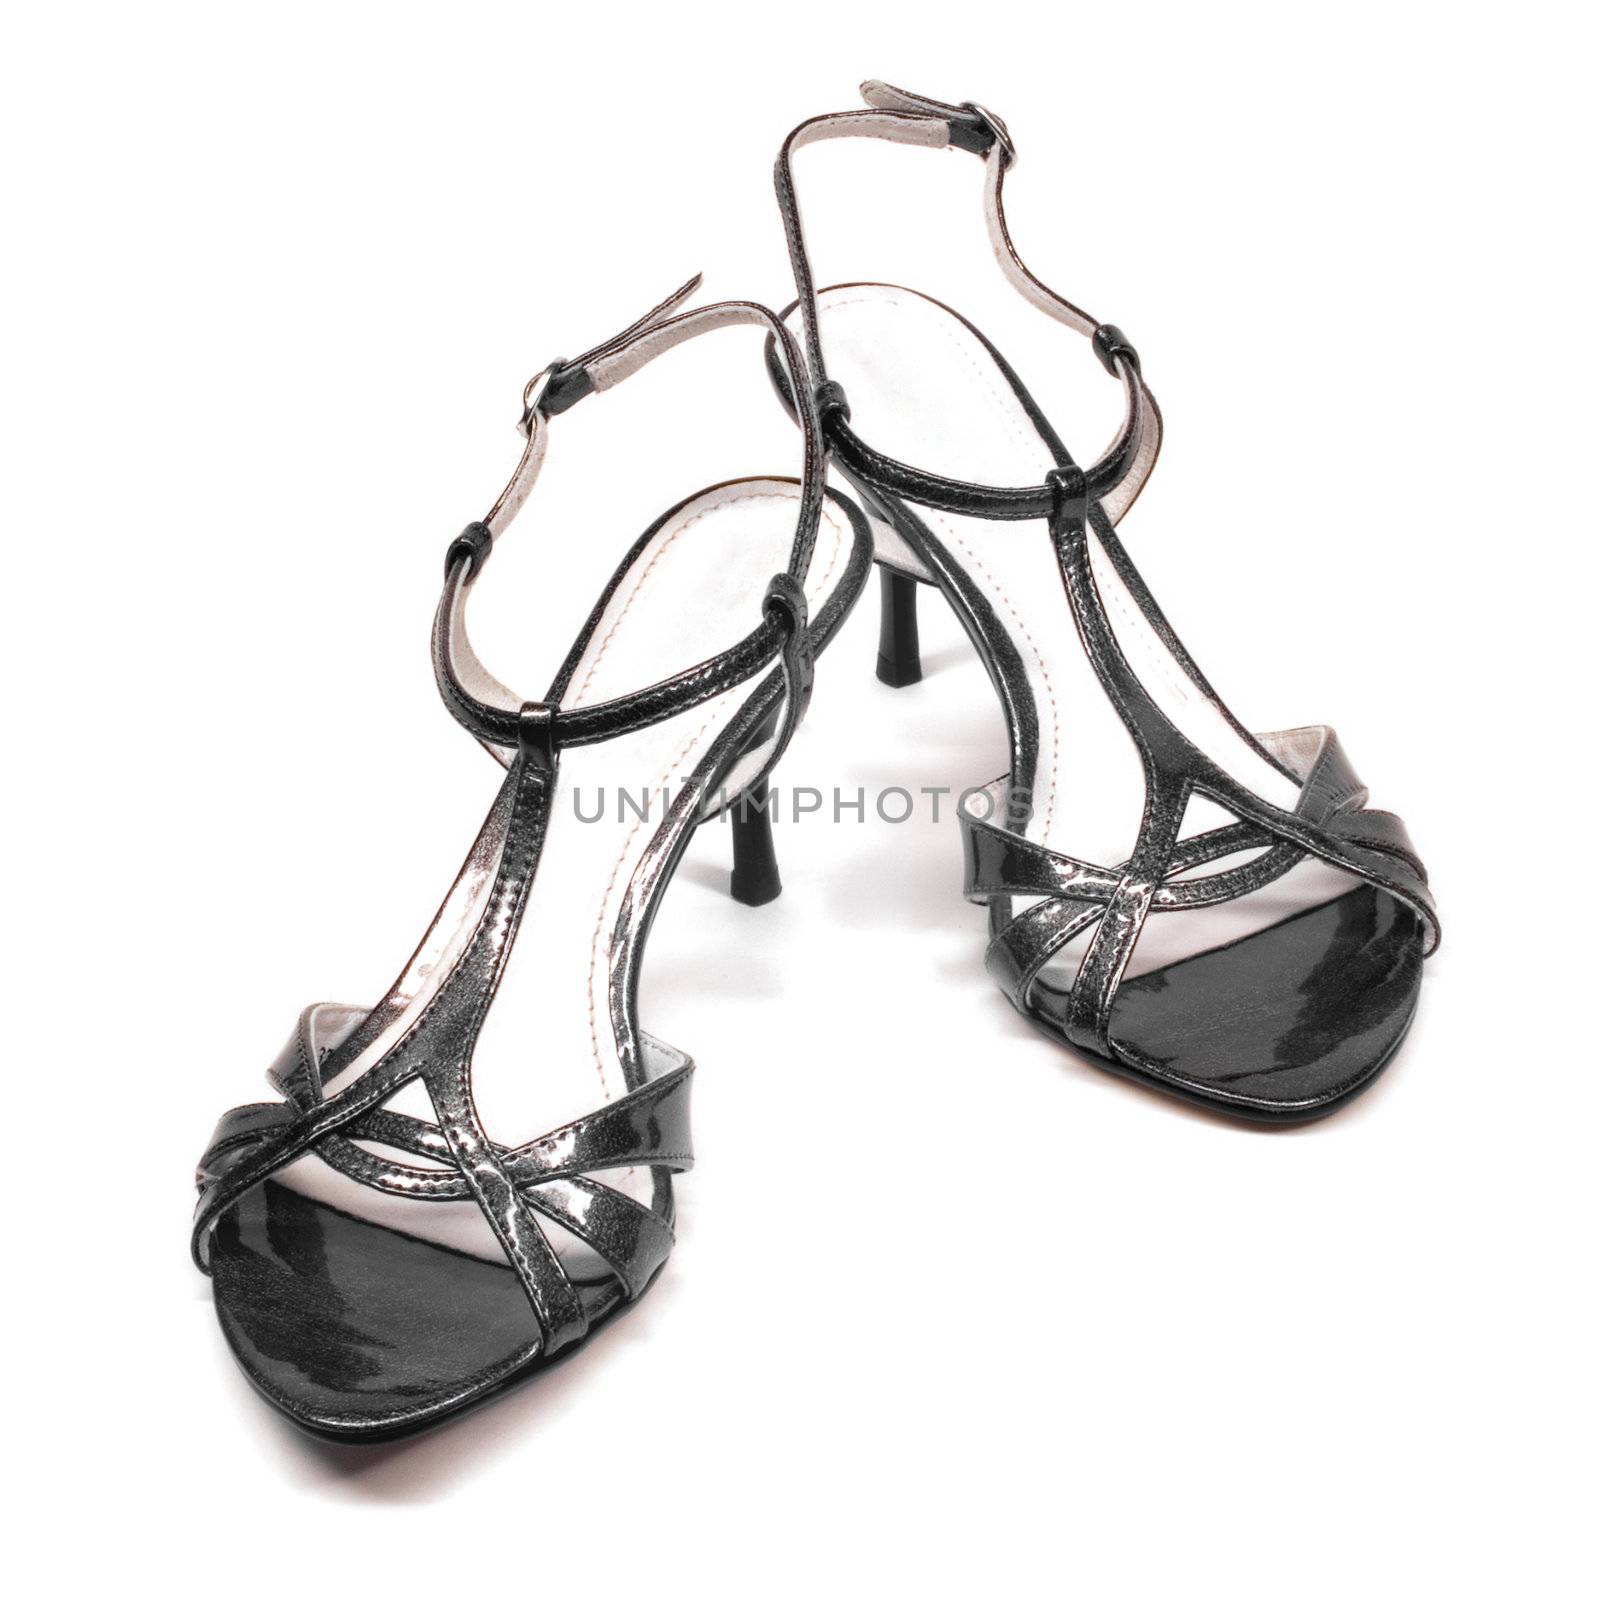 Stylish high heels sandals on white background with smooth shadows